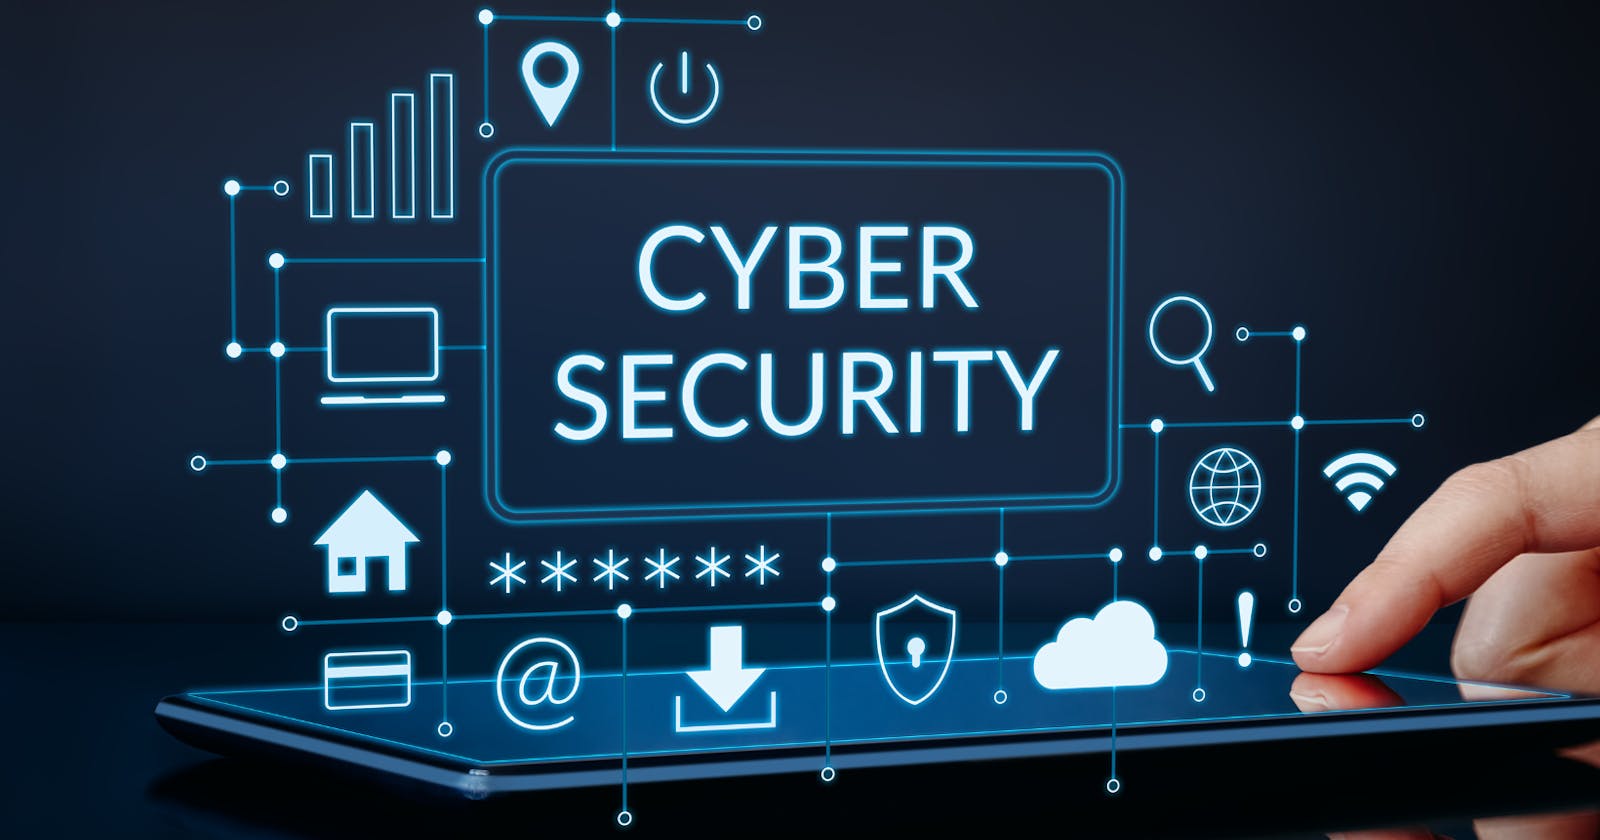 Basic Concepts Of CYBERSECURITY